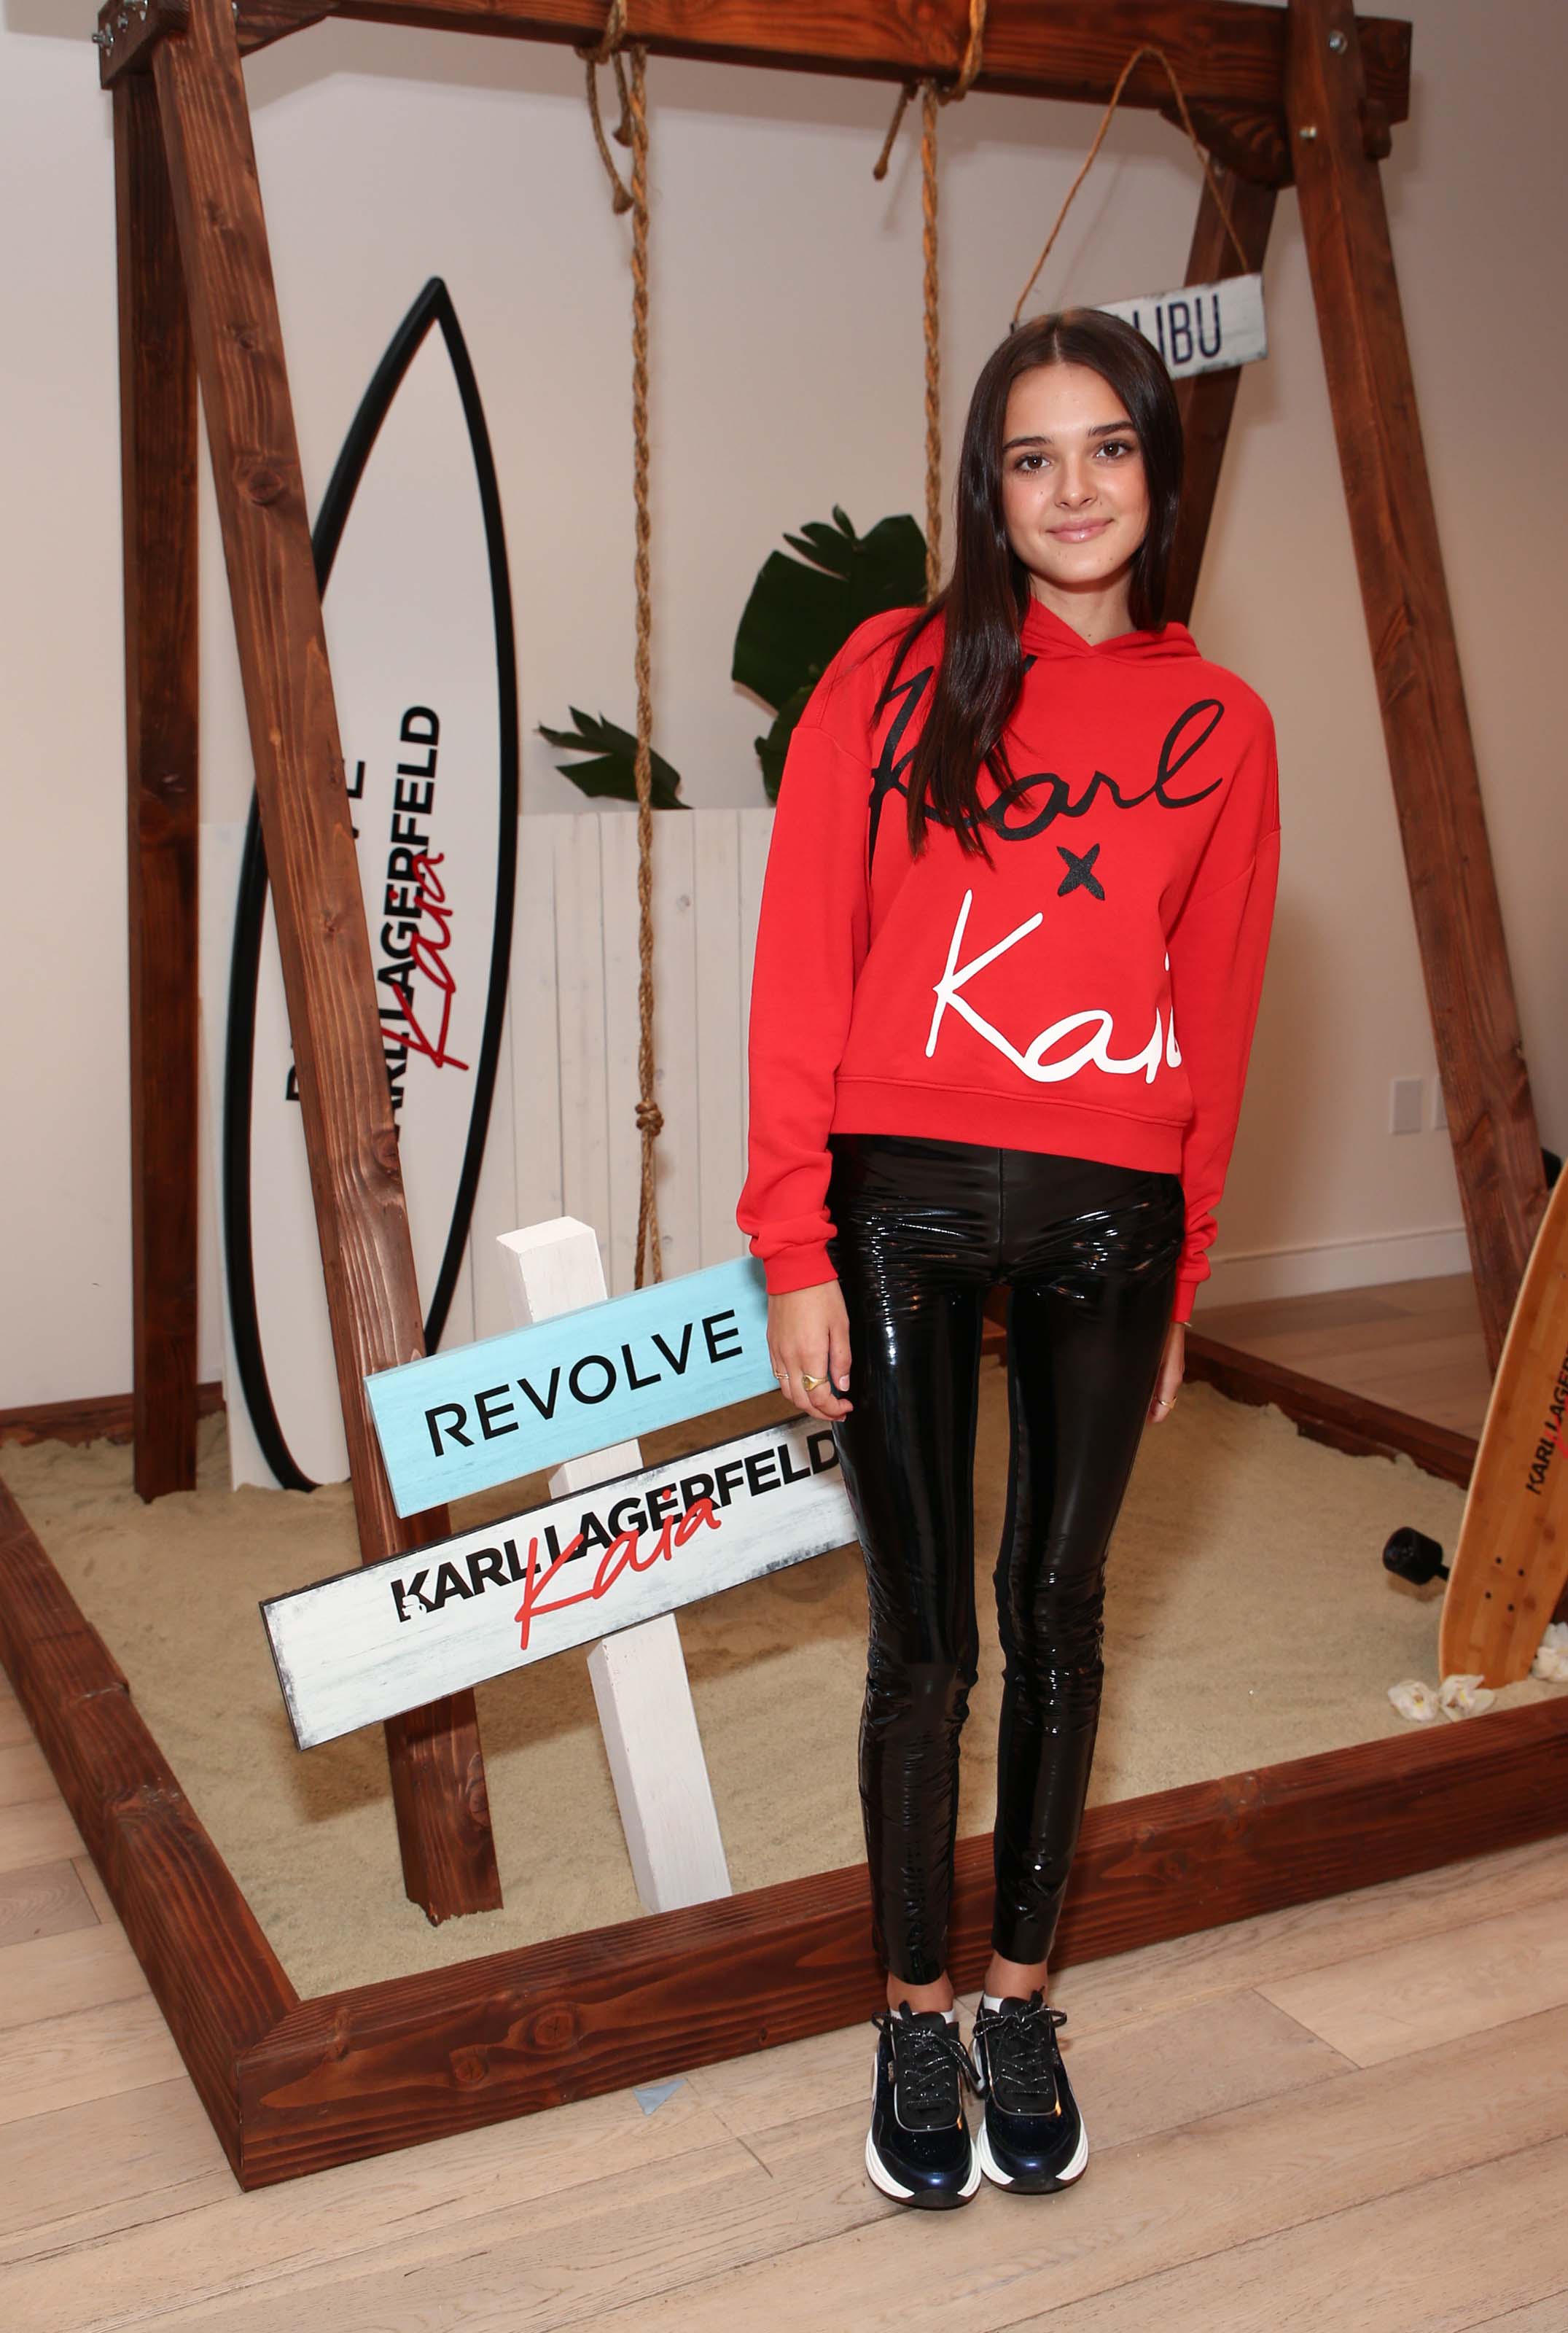 Charlotte Lawrence attends Karl Lagerfeld x Revolve launch